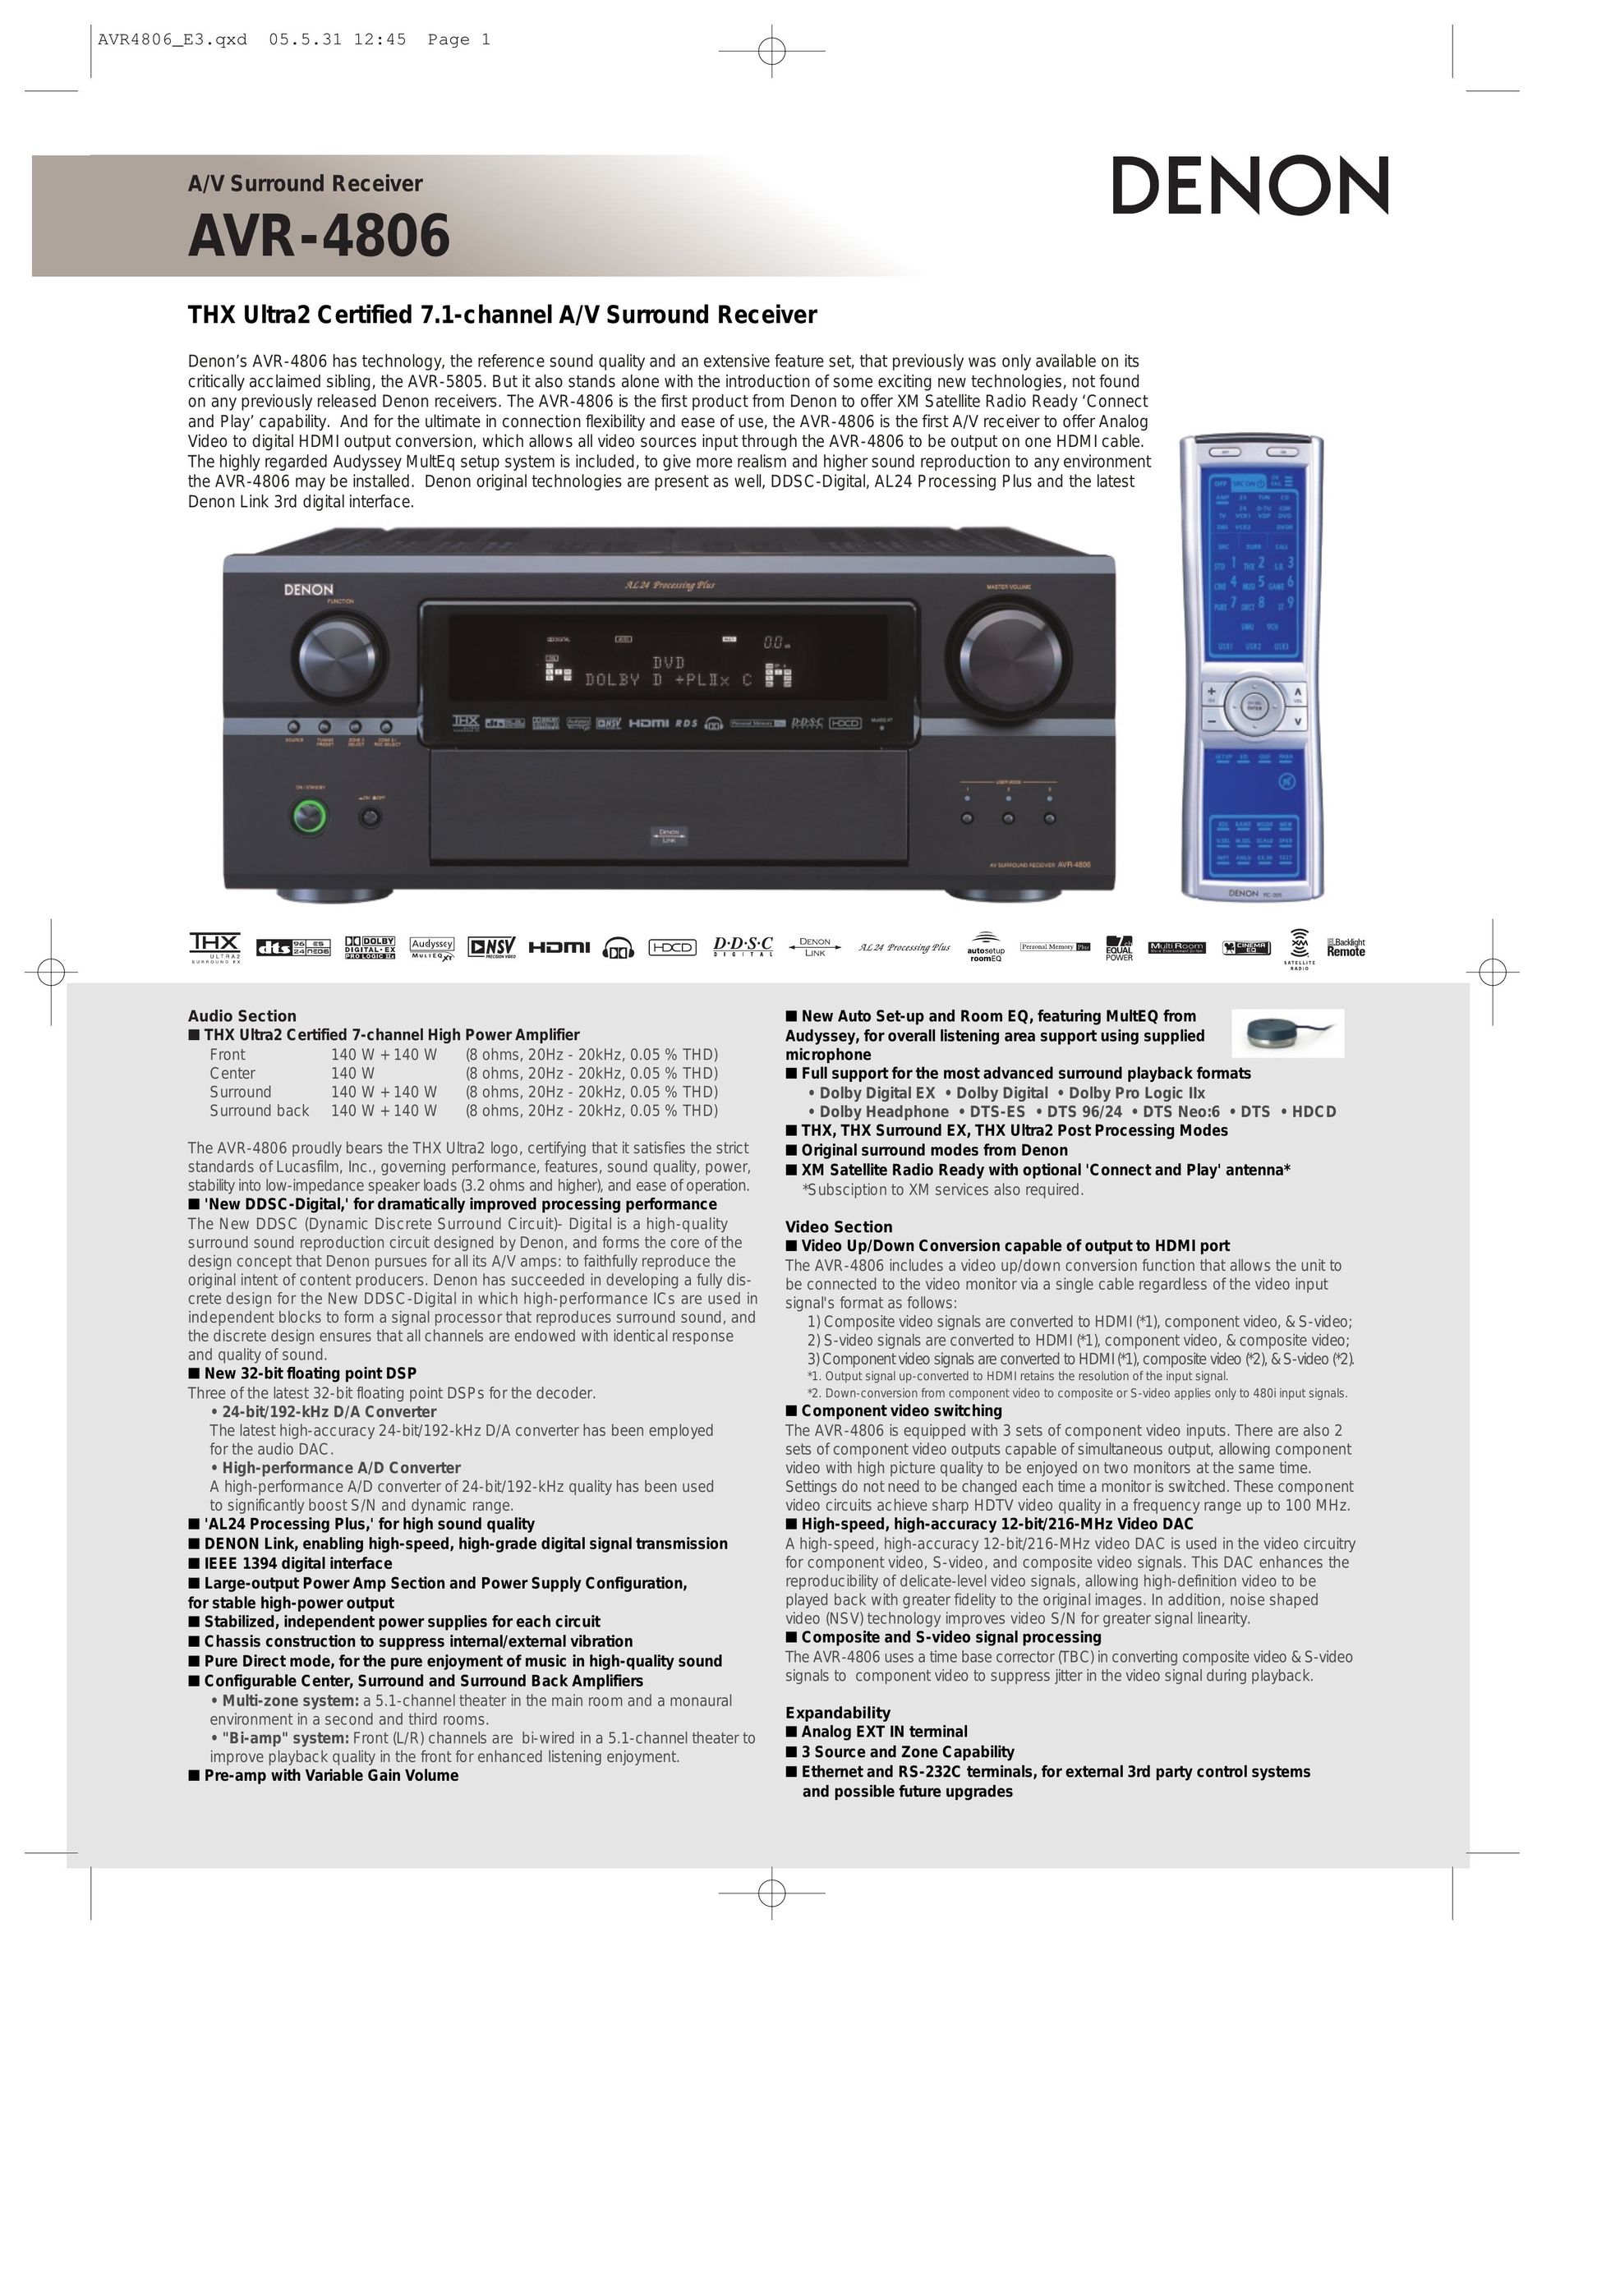 Denon AVR-4806 Home Theater System User Manual